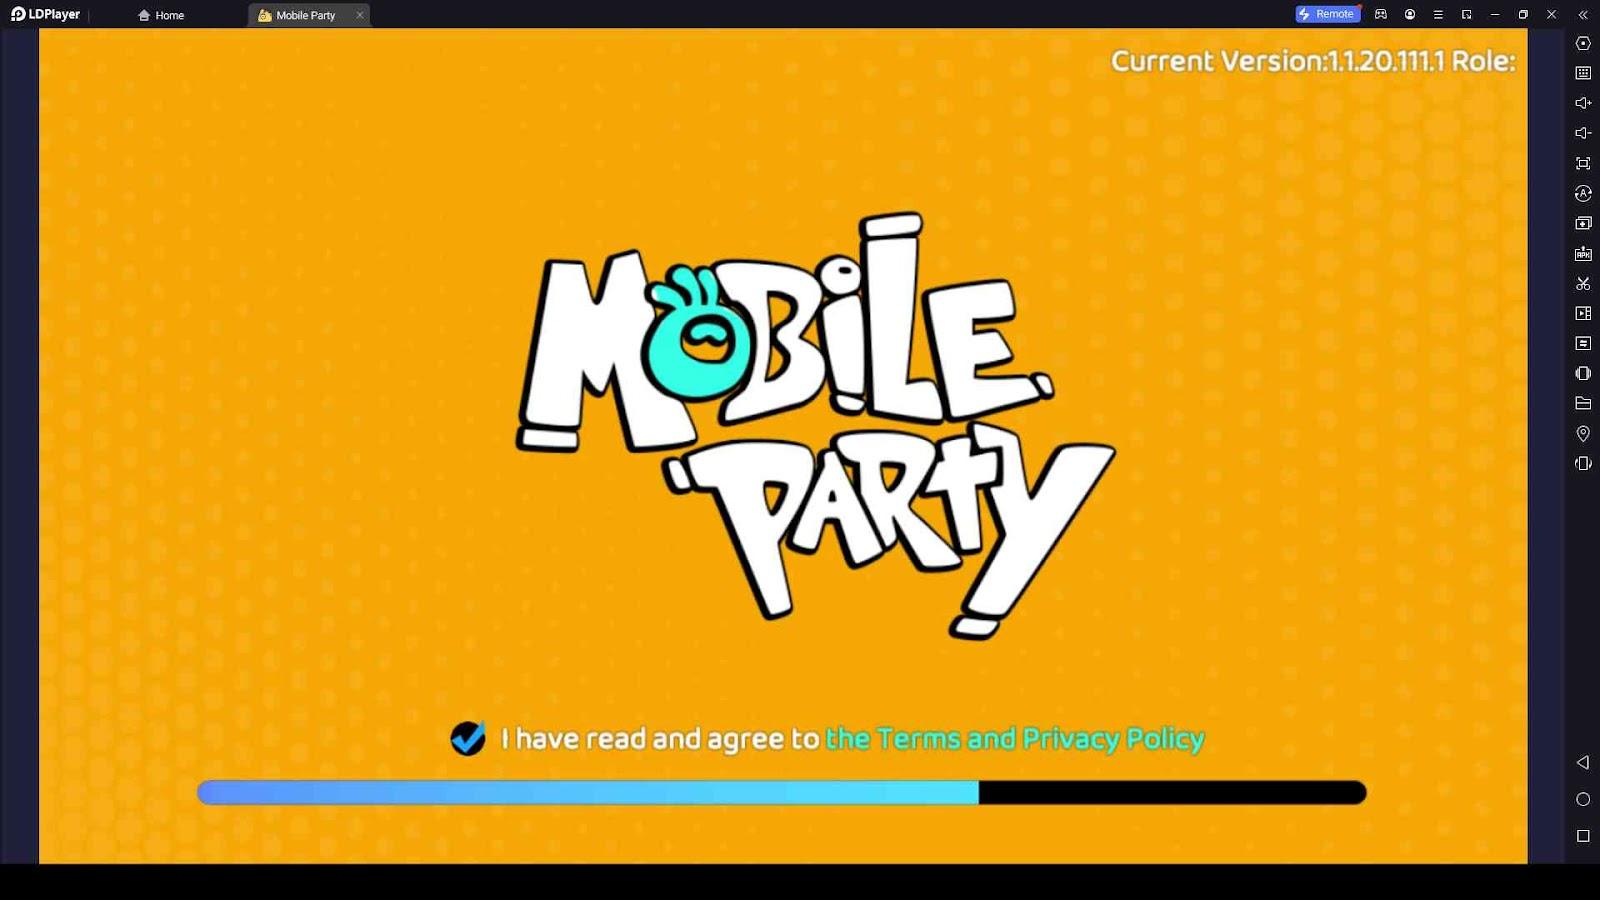 Mobile Party - Ultimate Guide and Tips